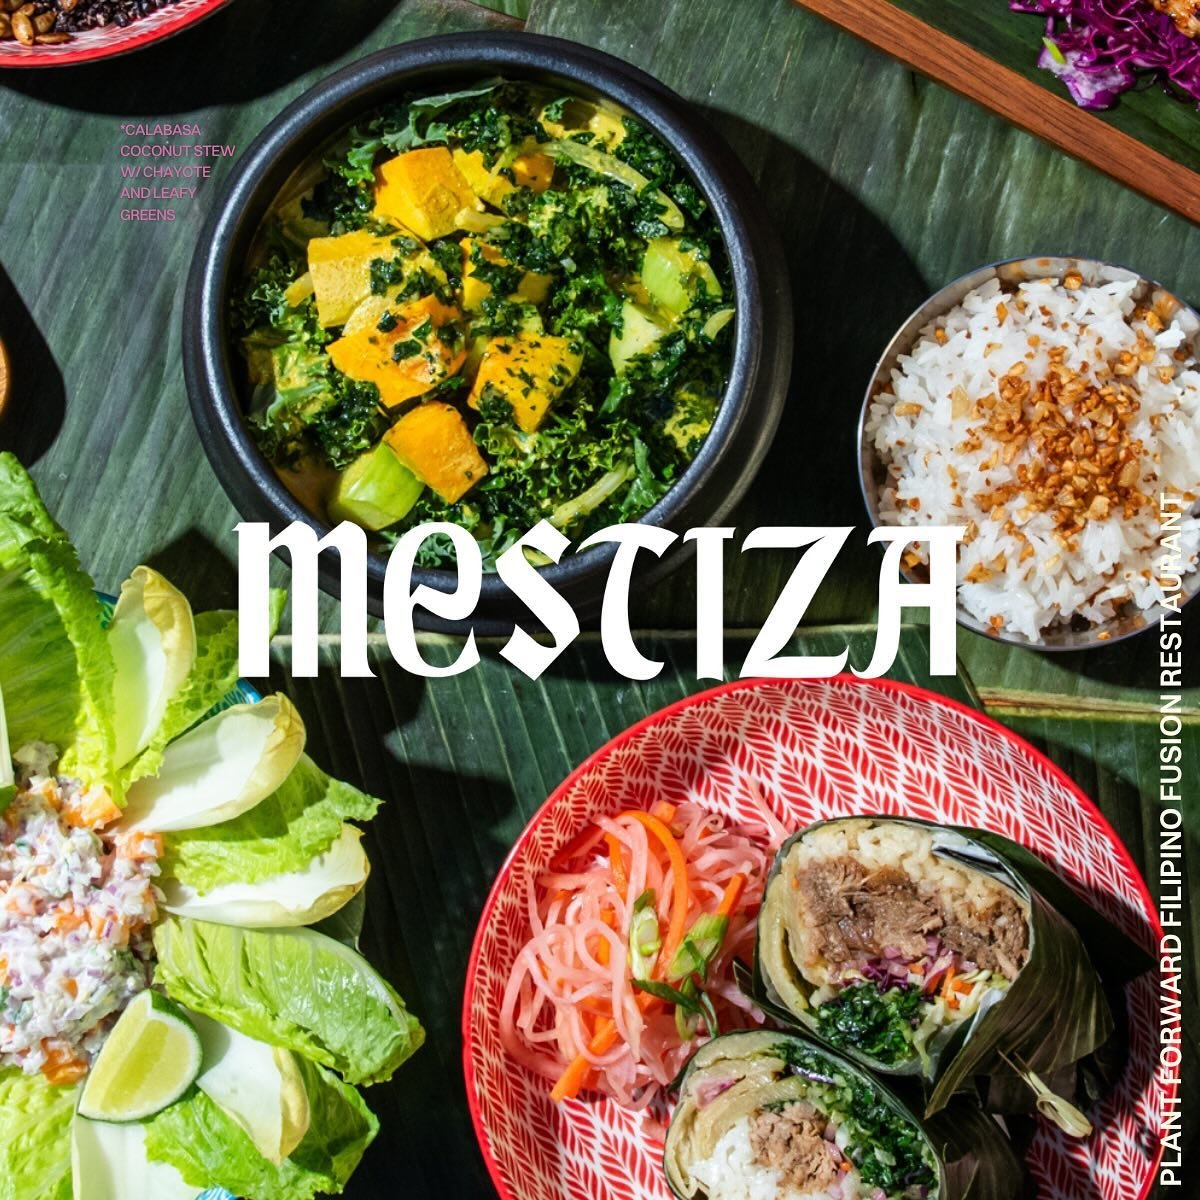 We&rsquo;re excited to announce that we&rsquo;re OFFICIALLY OPEN! 📣✨ The team is so excited to share our new plant forward Filipino fusion menu with you all!

Stop by opening week for free soft serve with a purchase of any meal. 🍦

#MESTIZA #MixedH